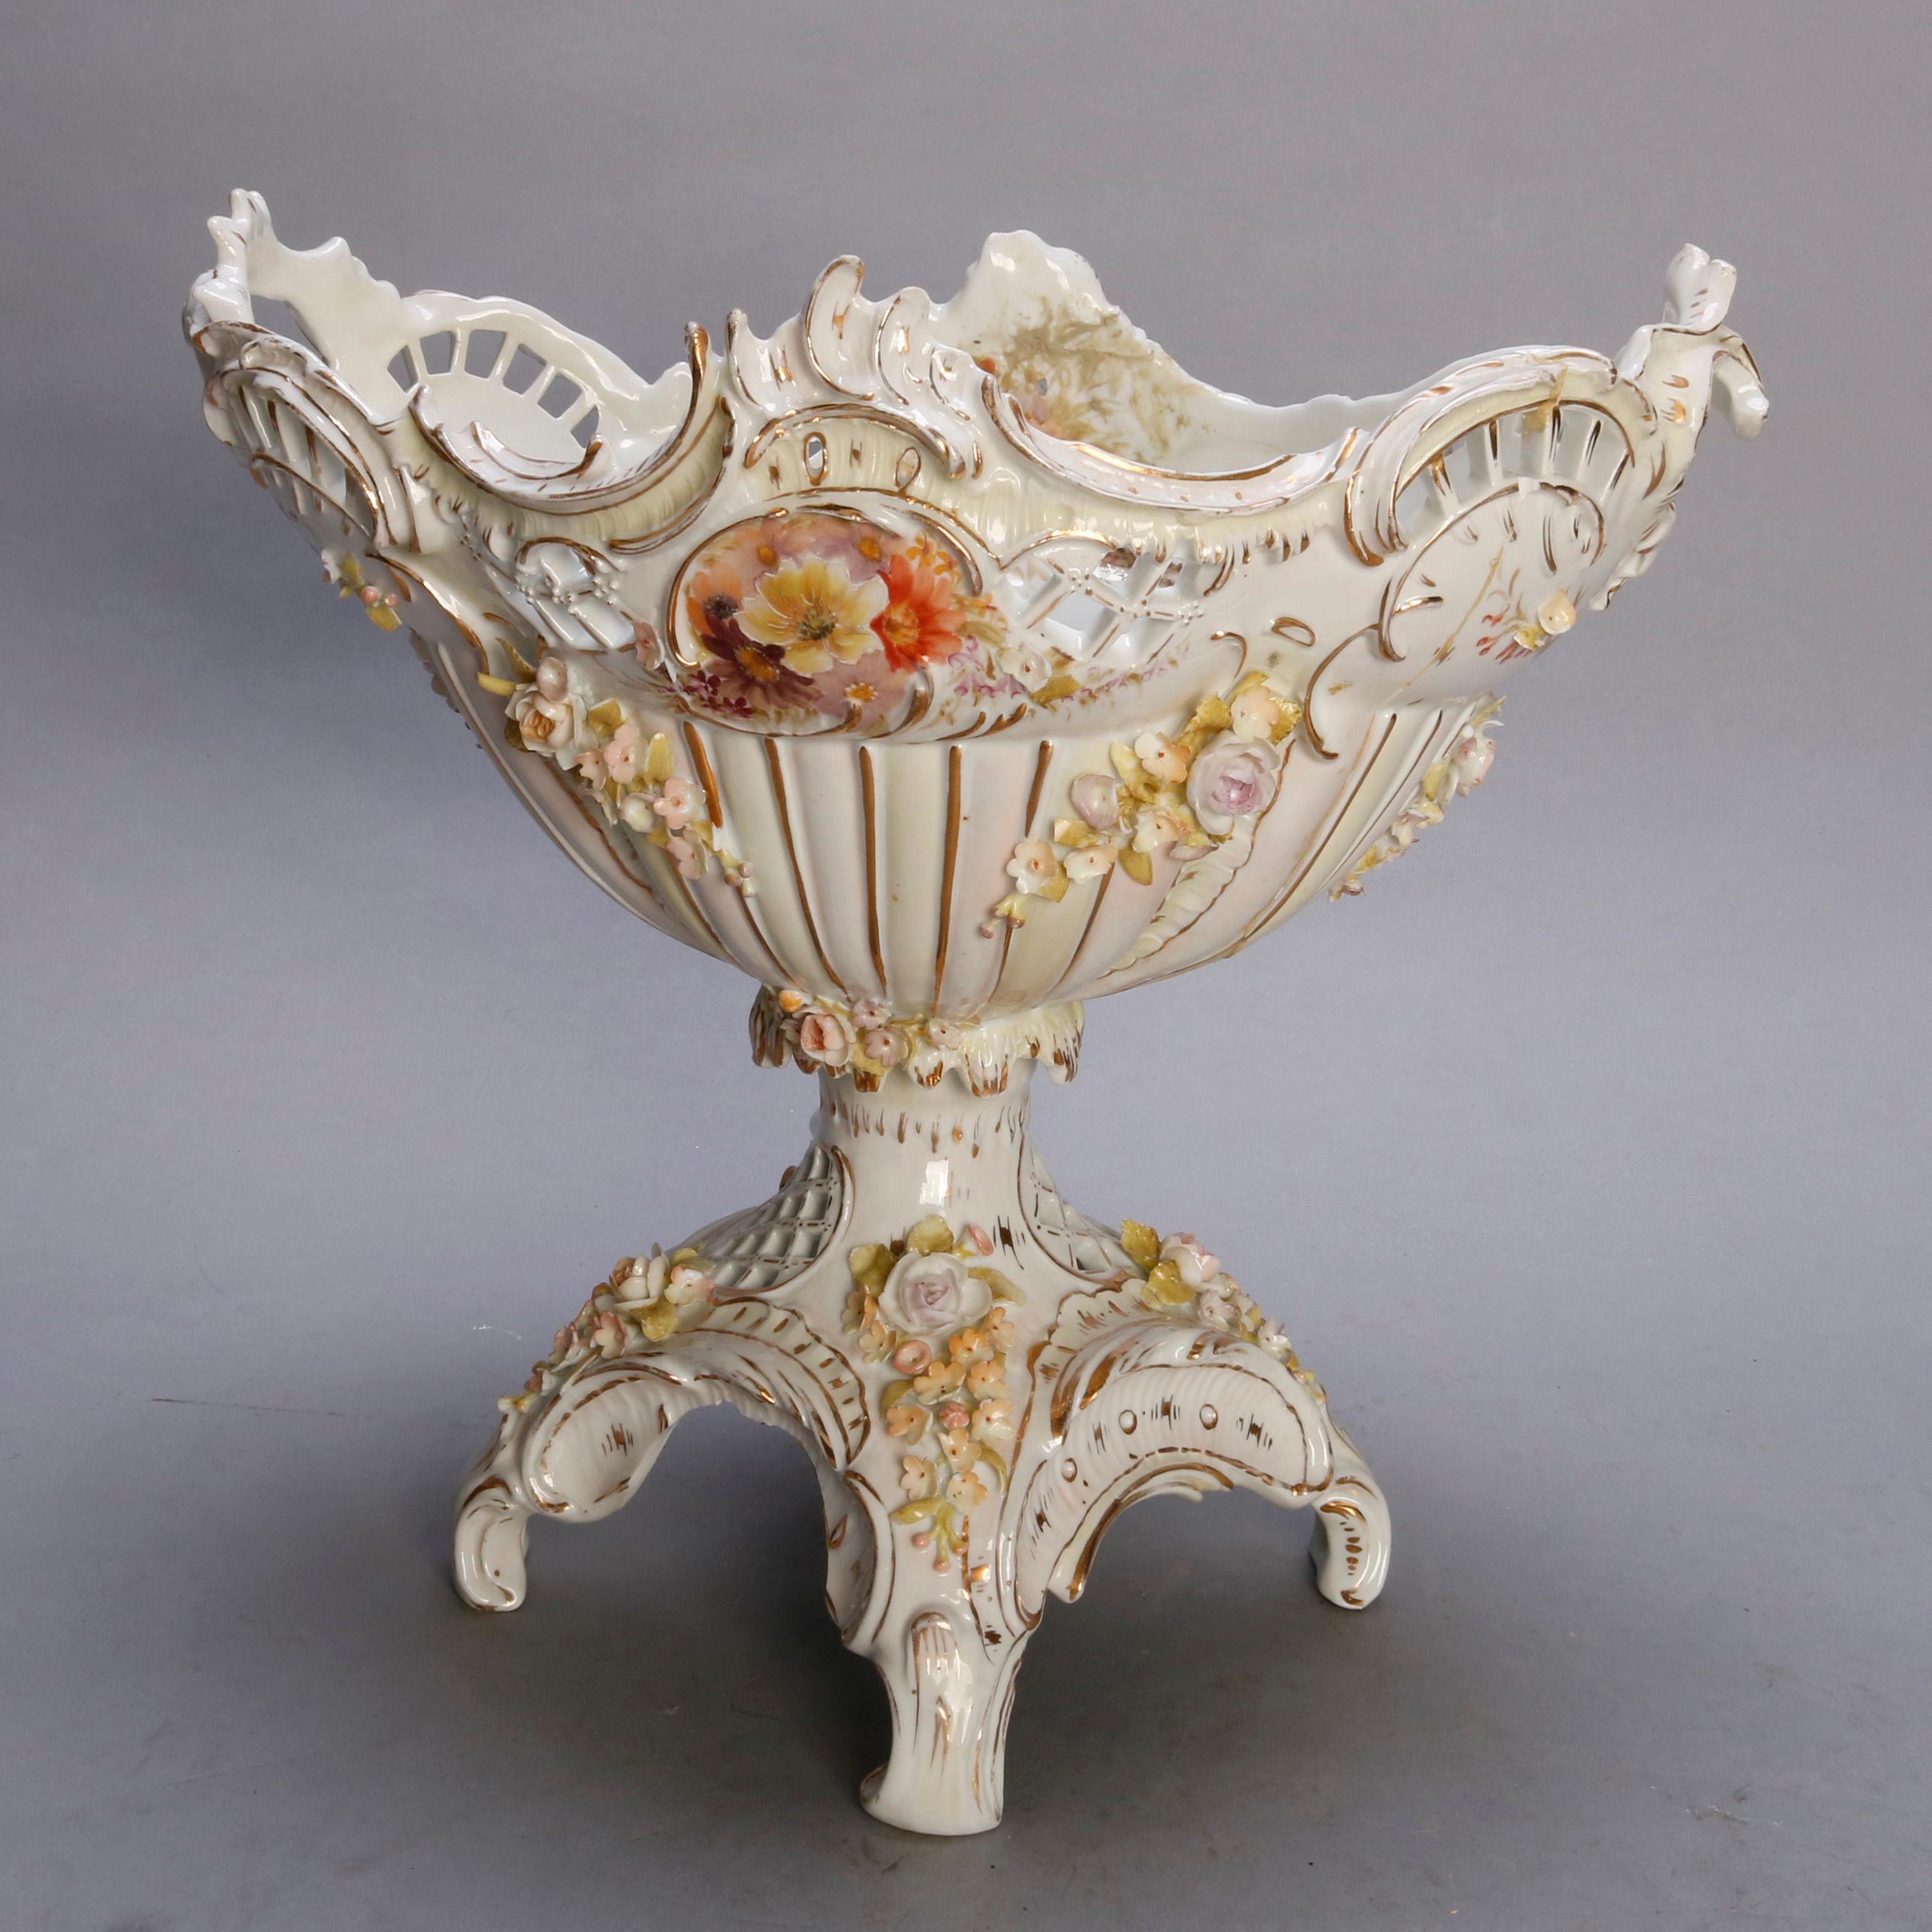 An antique German Rococo compote by Meissen offers porcelain construction with pierced foliate and scroll form bowl surmounting footed base with cherub, allowver hand painted and gilt floral decoration, marked on base as photographed, circa